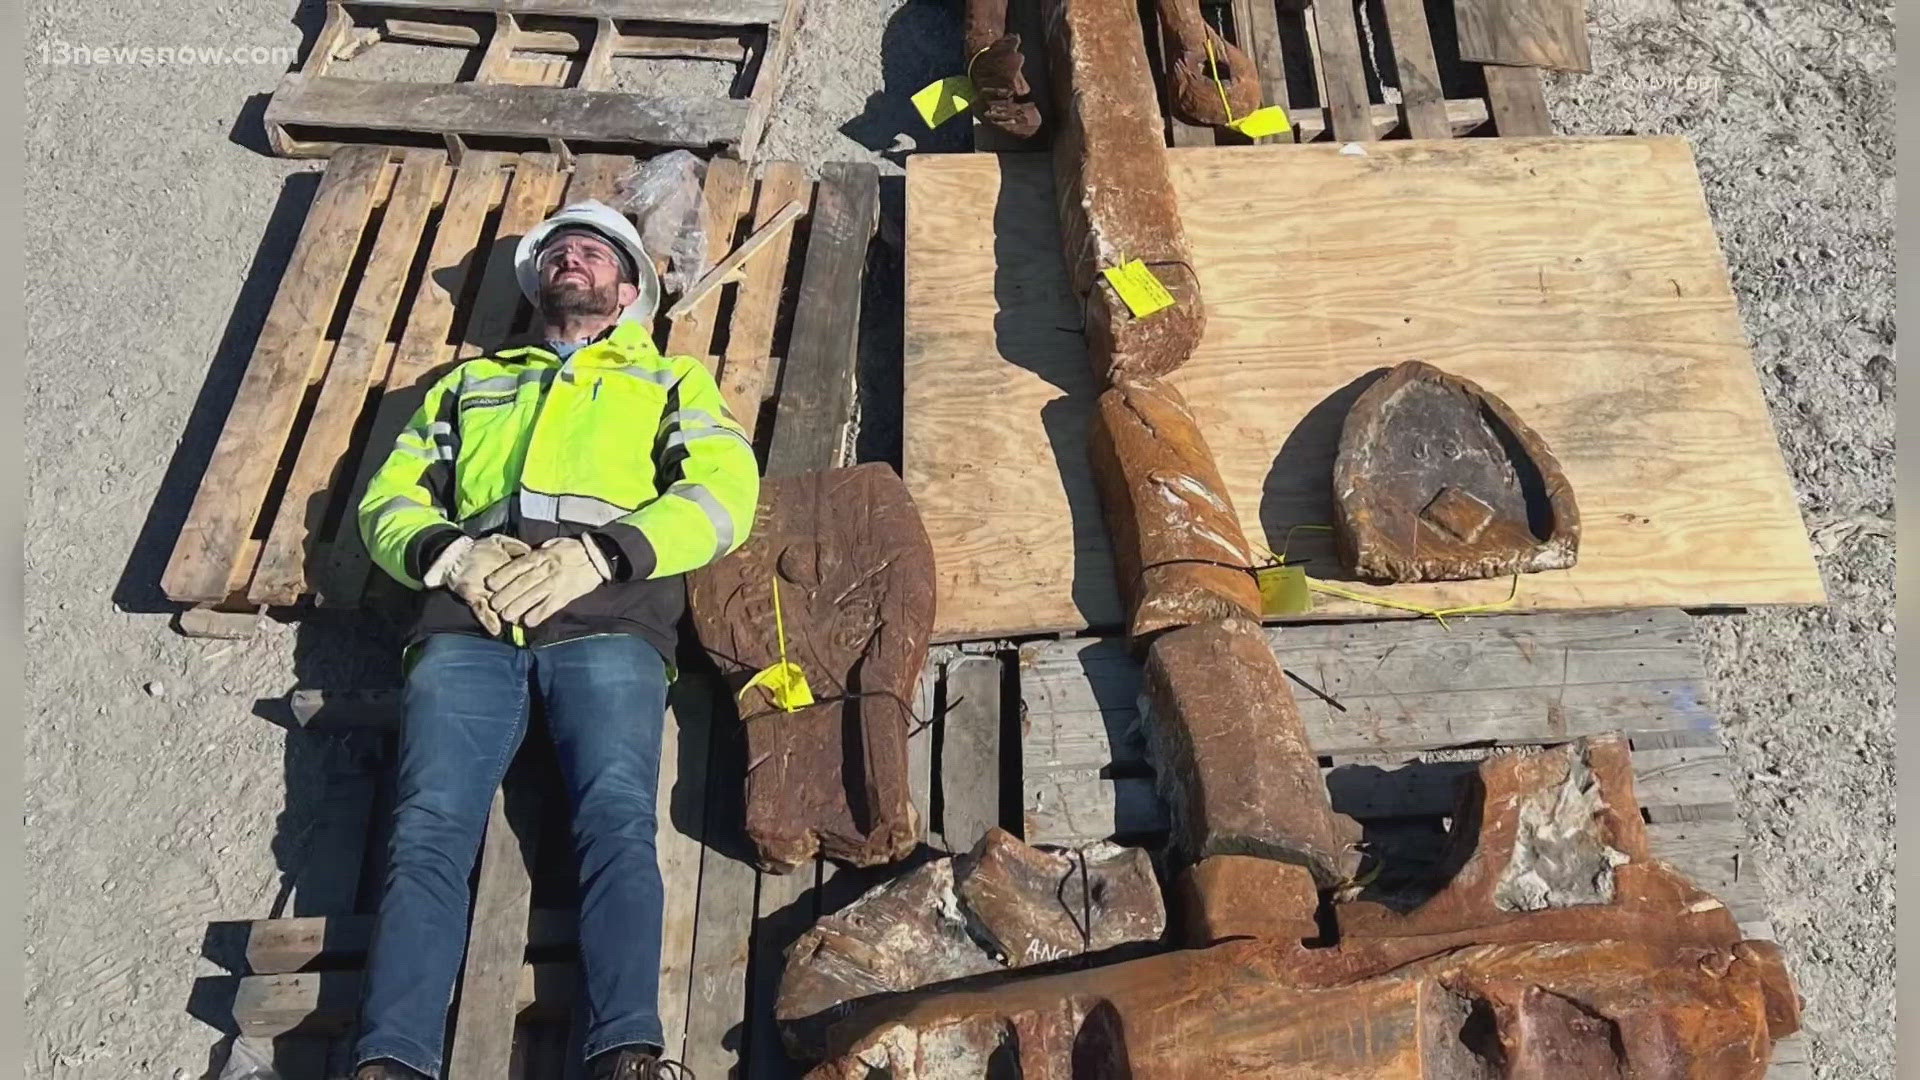 About a year ago, crews tunneled into a centuries-old ship anchor, which delayed the project for several months.